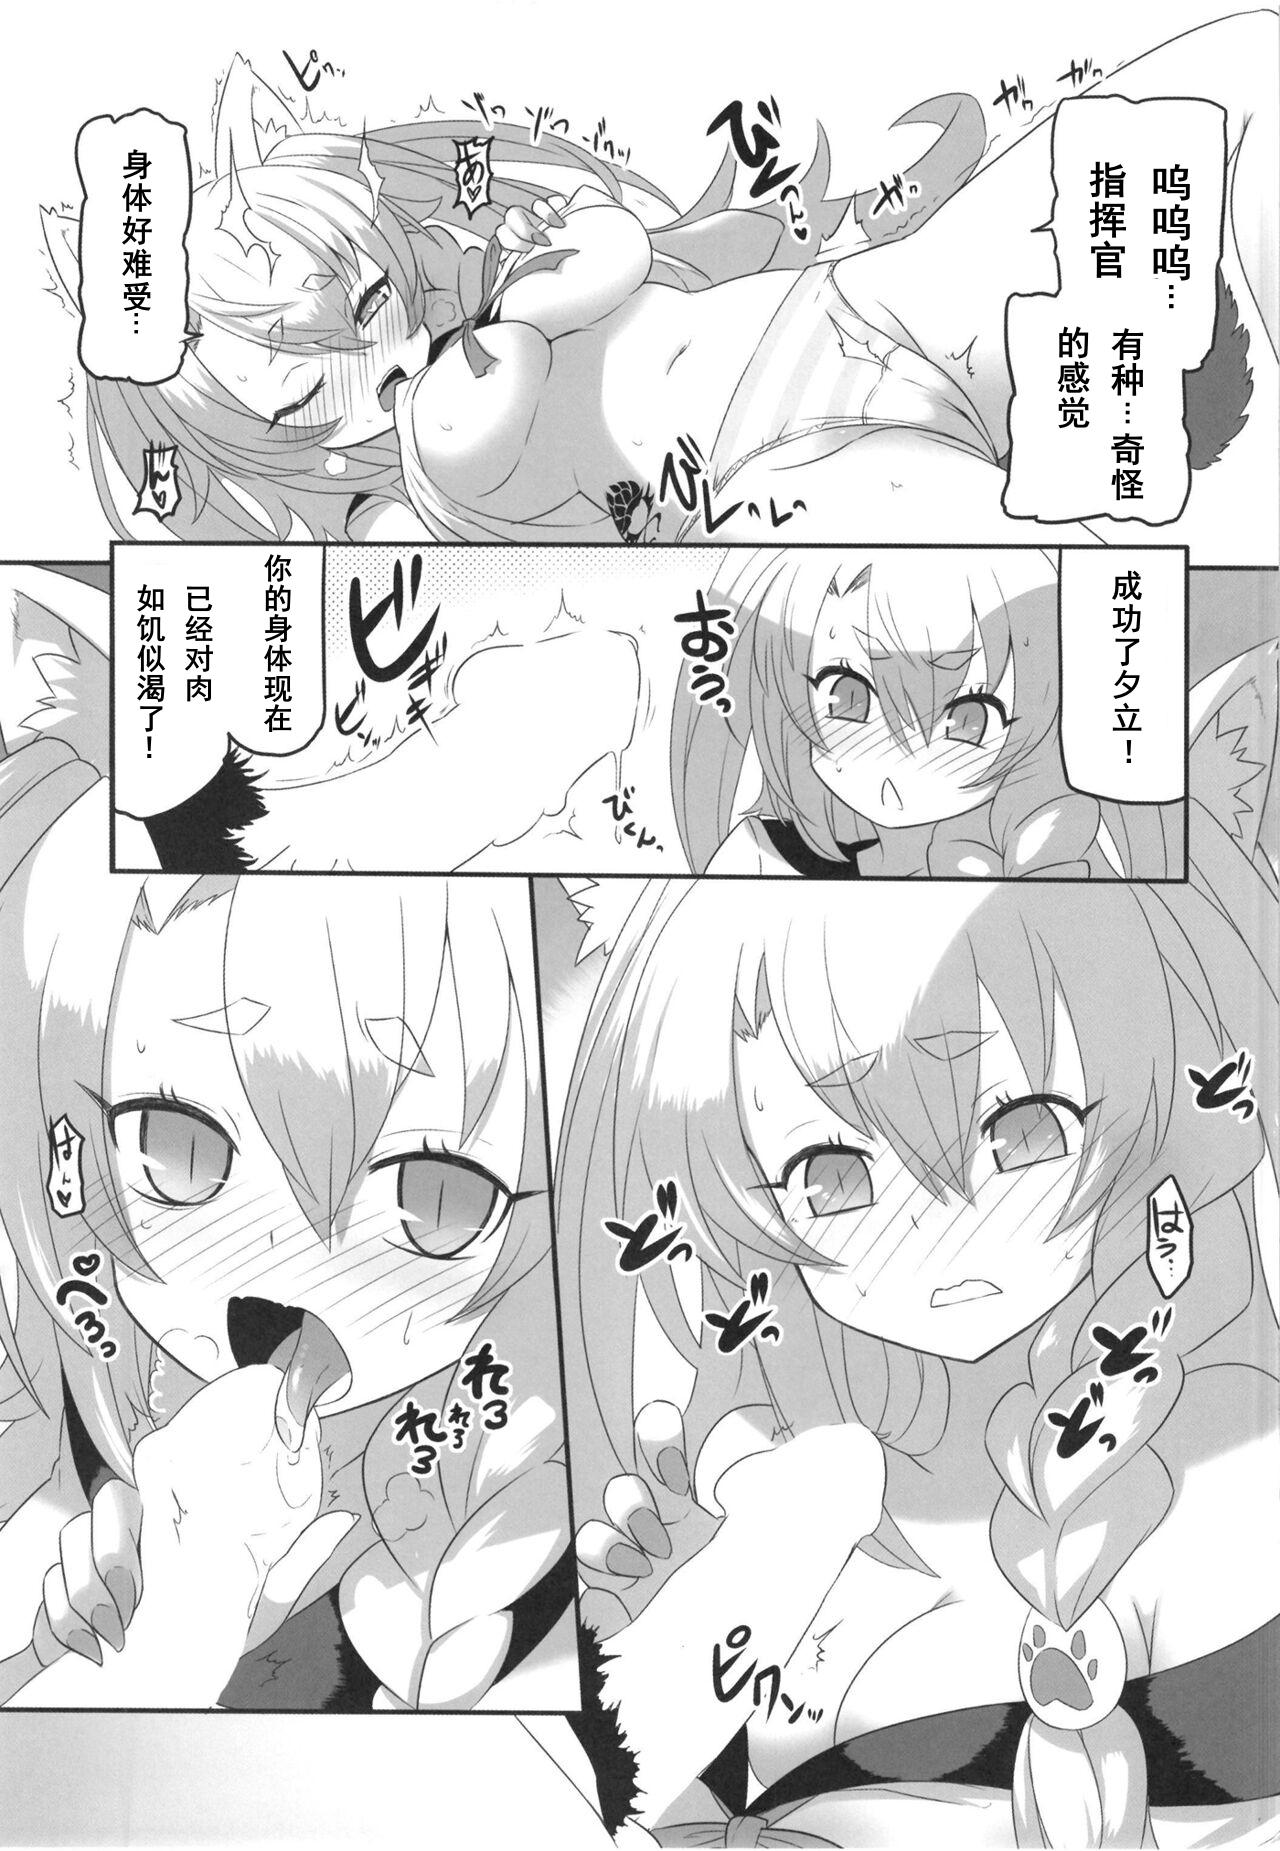 Creampie Yuudachi to Oishii Oniku - Yudachi and delicious meat - Azur lane Gay Blondhair - Page 10